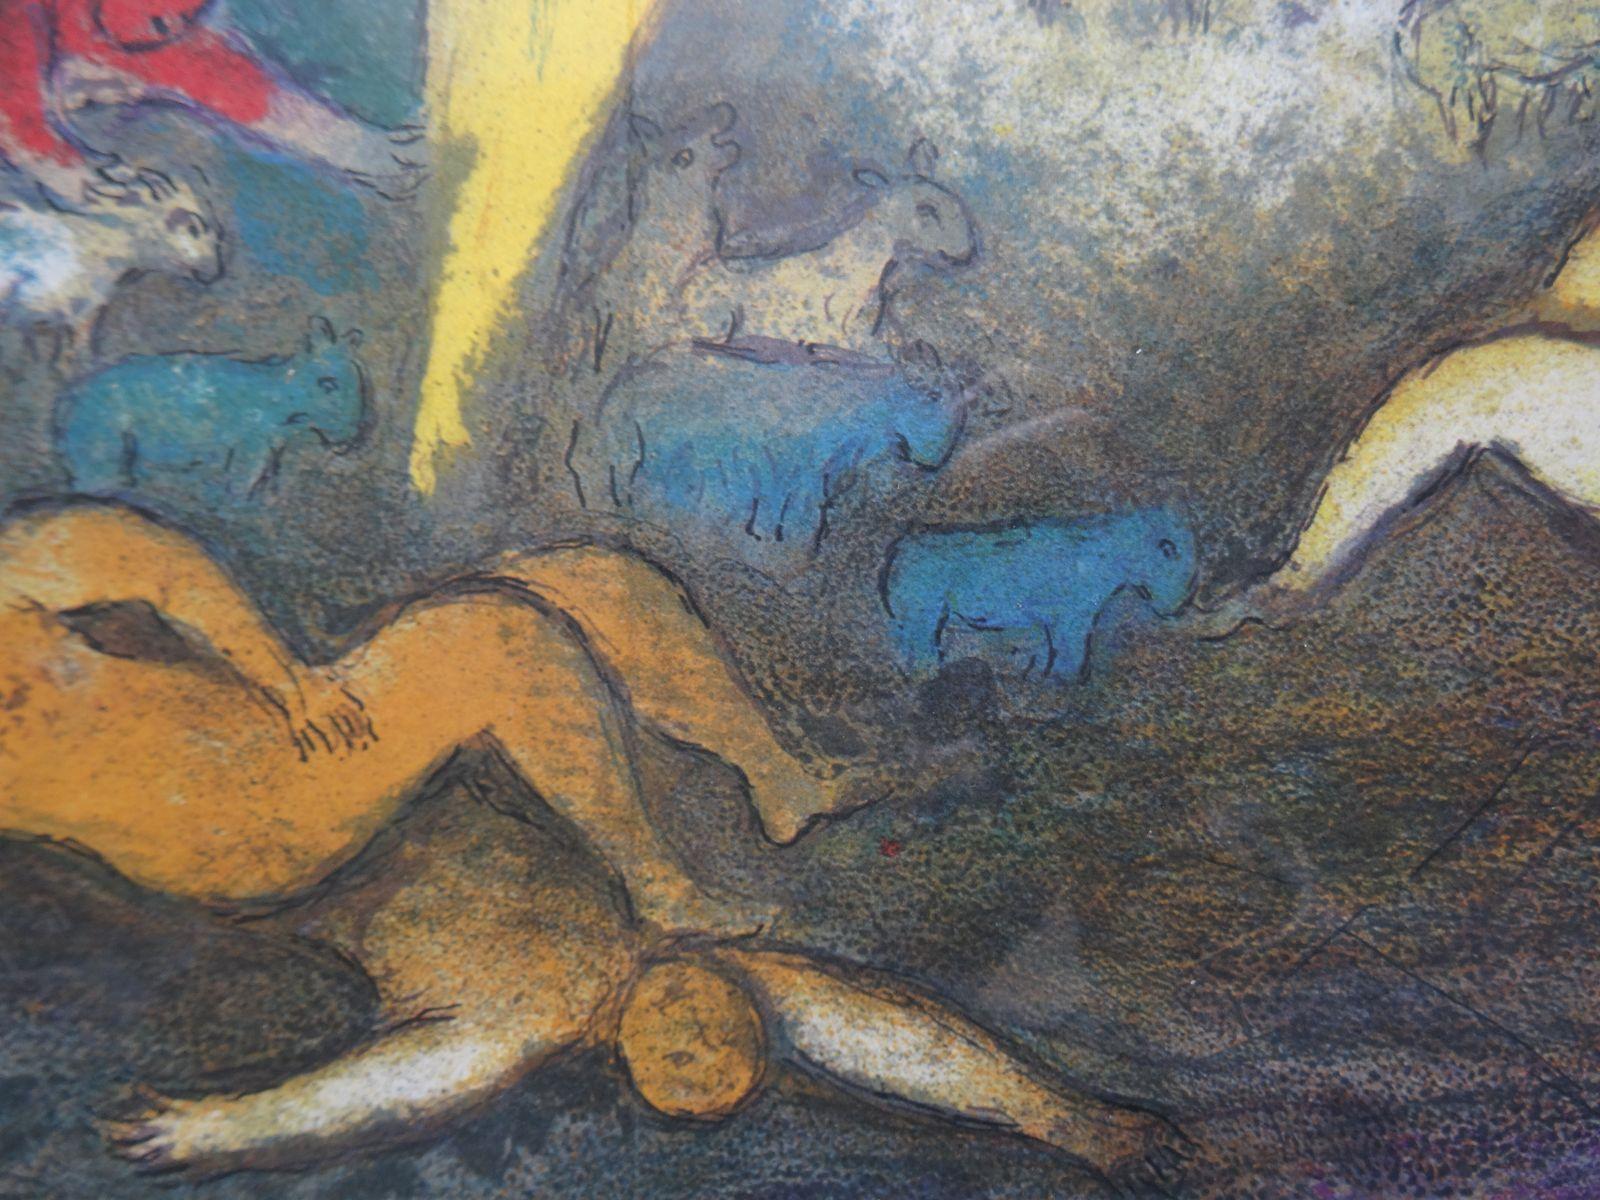 Daphnis and Chloe Suite. 1977, lithography, 48x33 cm - Gray Figurative Print by Marc Chagall